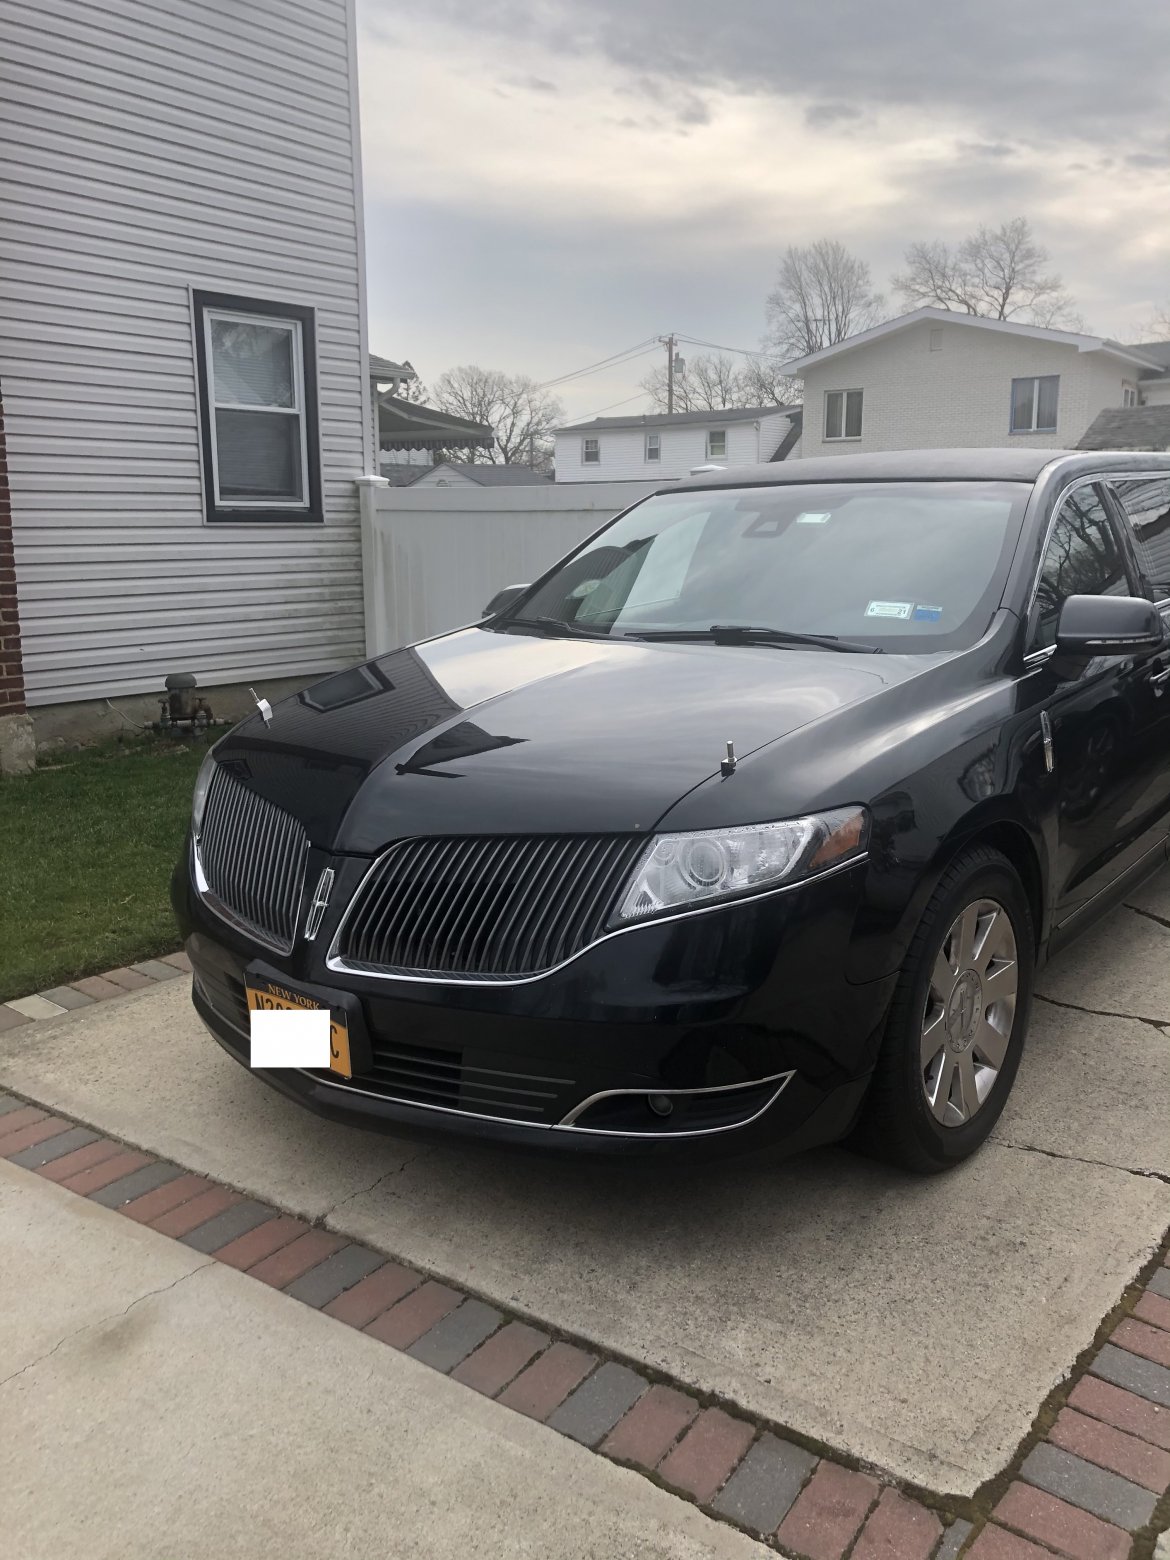 Limousine for sale: 2013 Lincoln MTK 120&quot; by executive